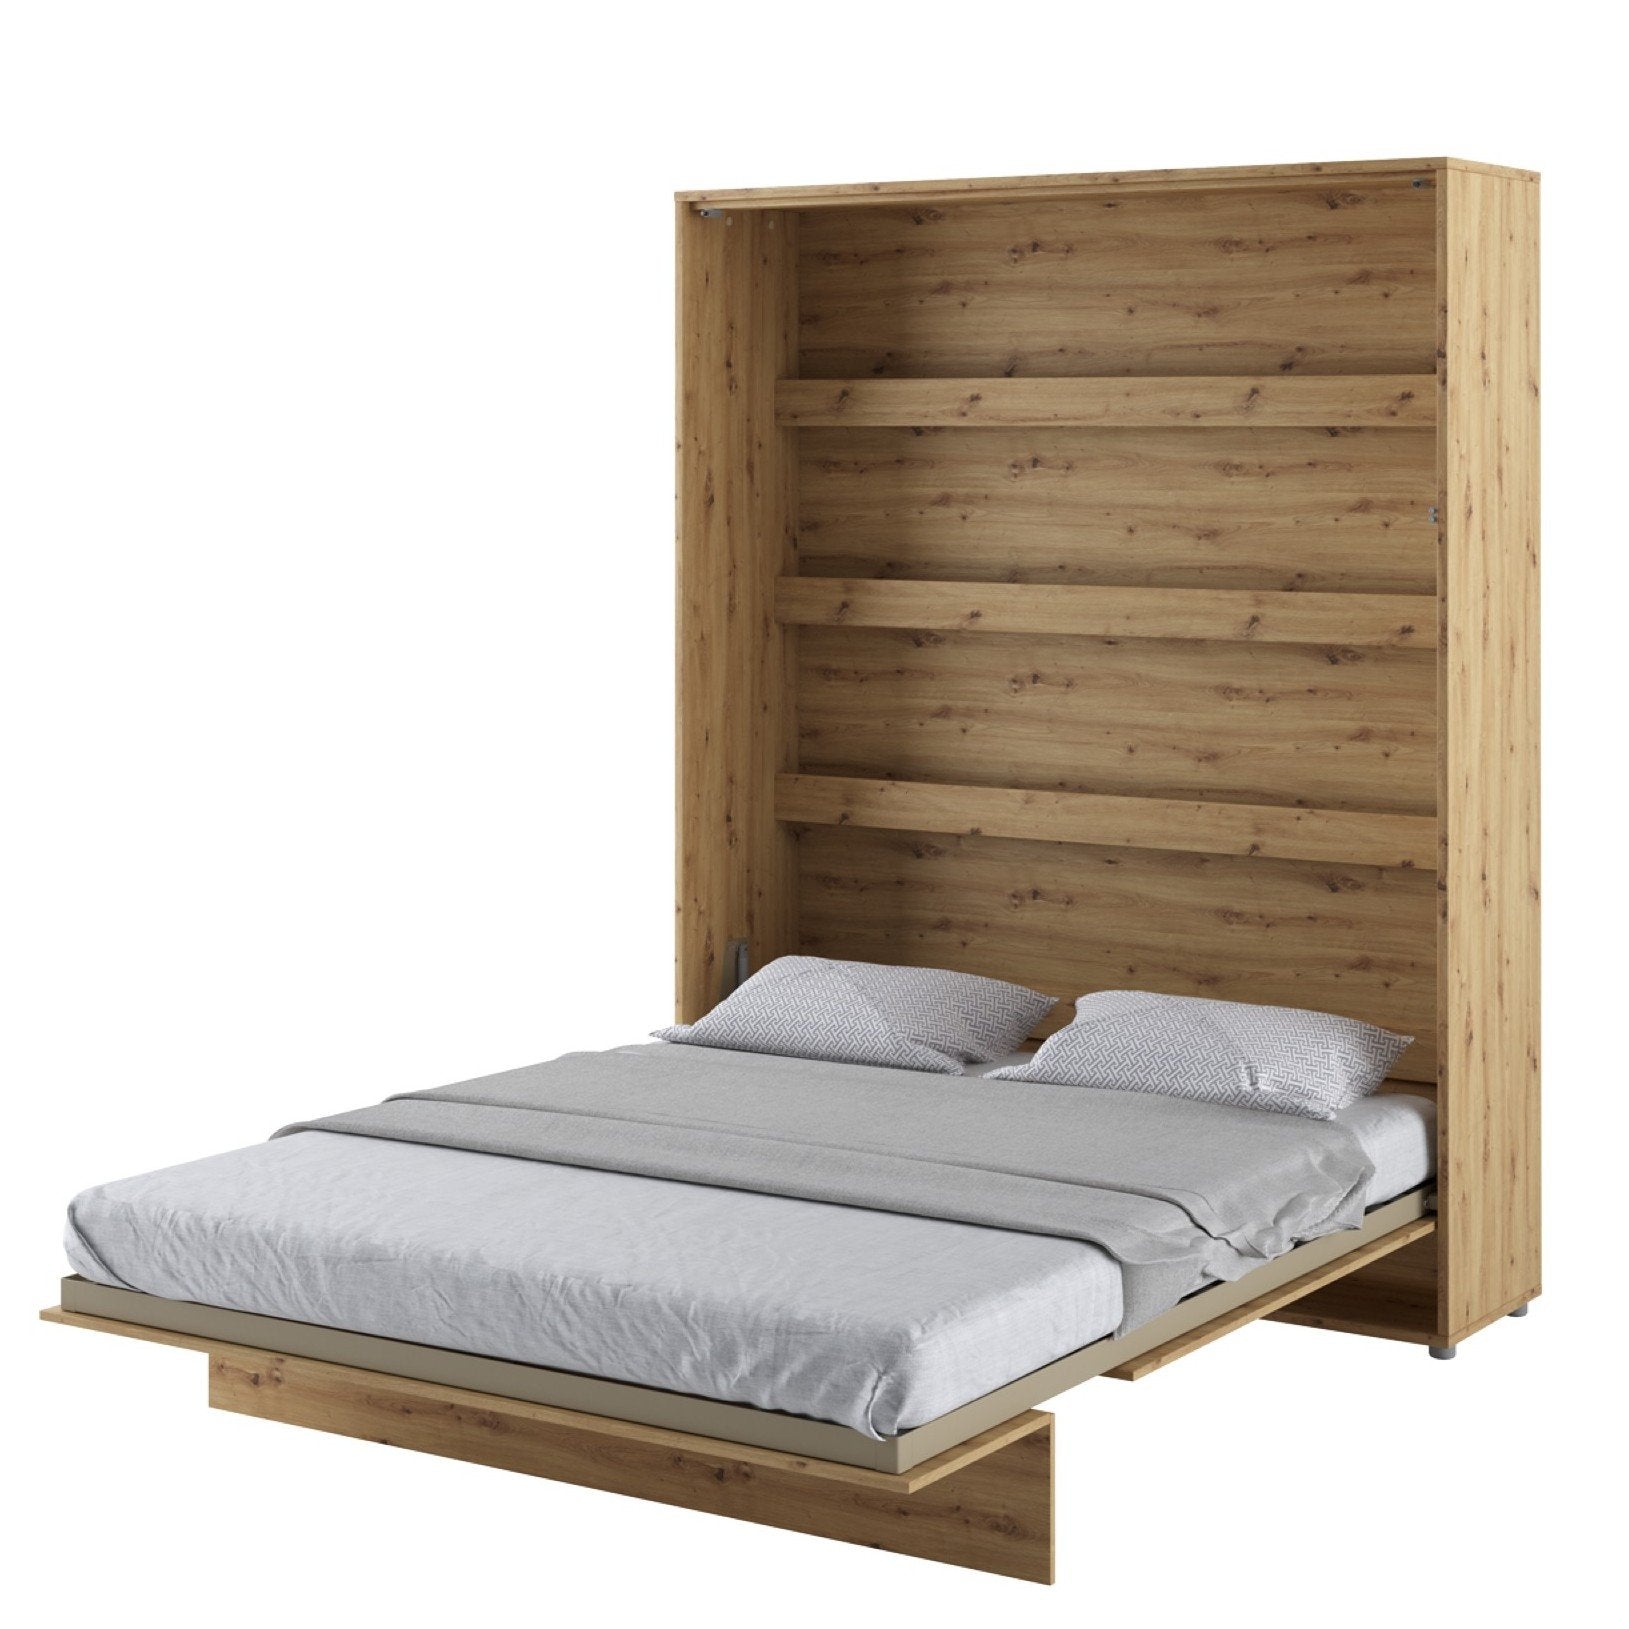 BC-13 Vertical Wall Bed Concept 180cm With Storage Cabinets and LED - Furniture Gold